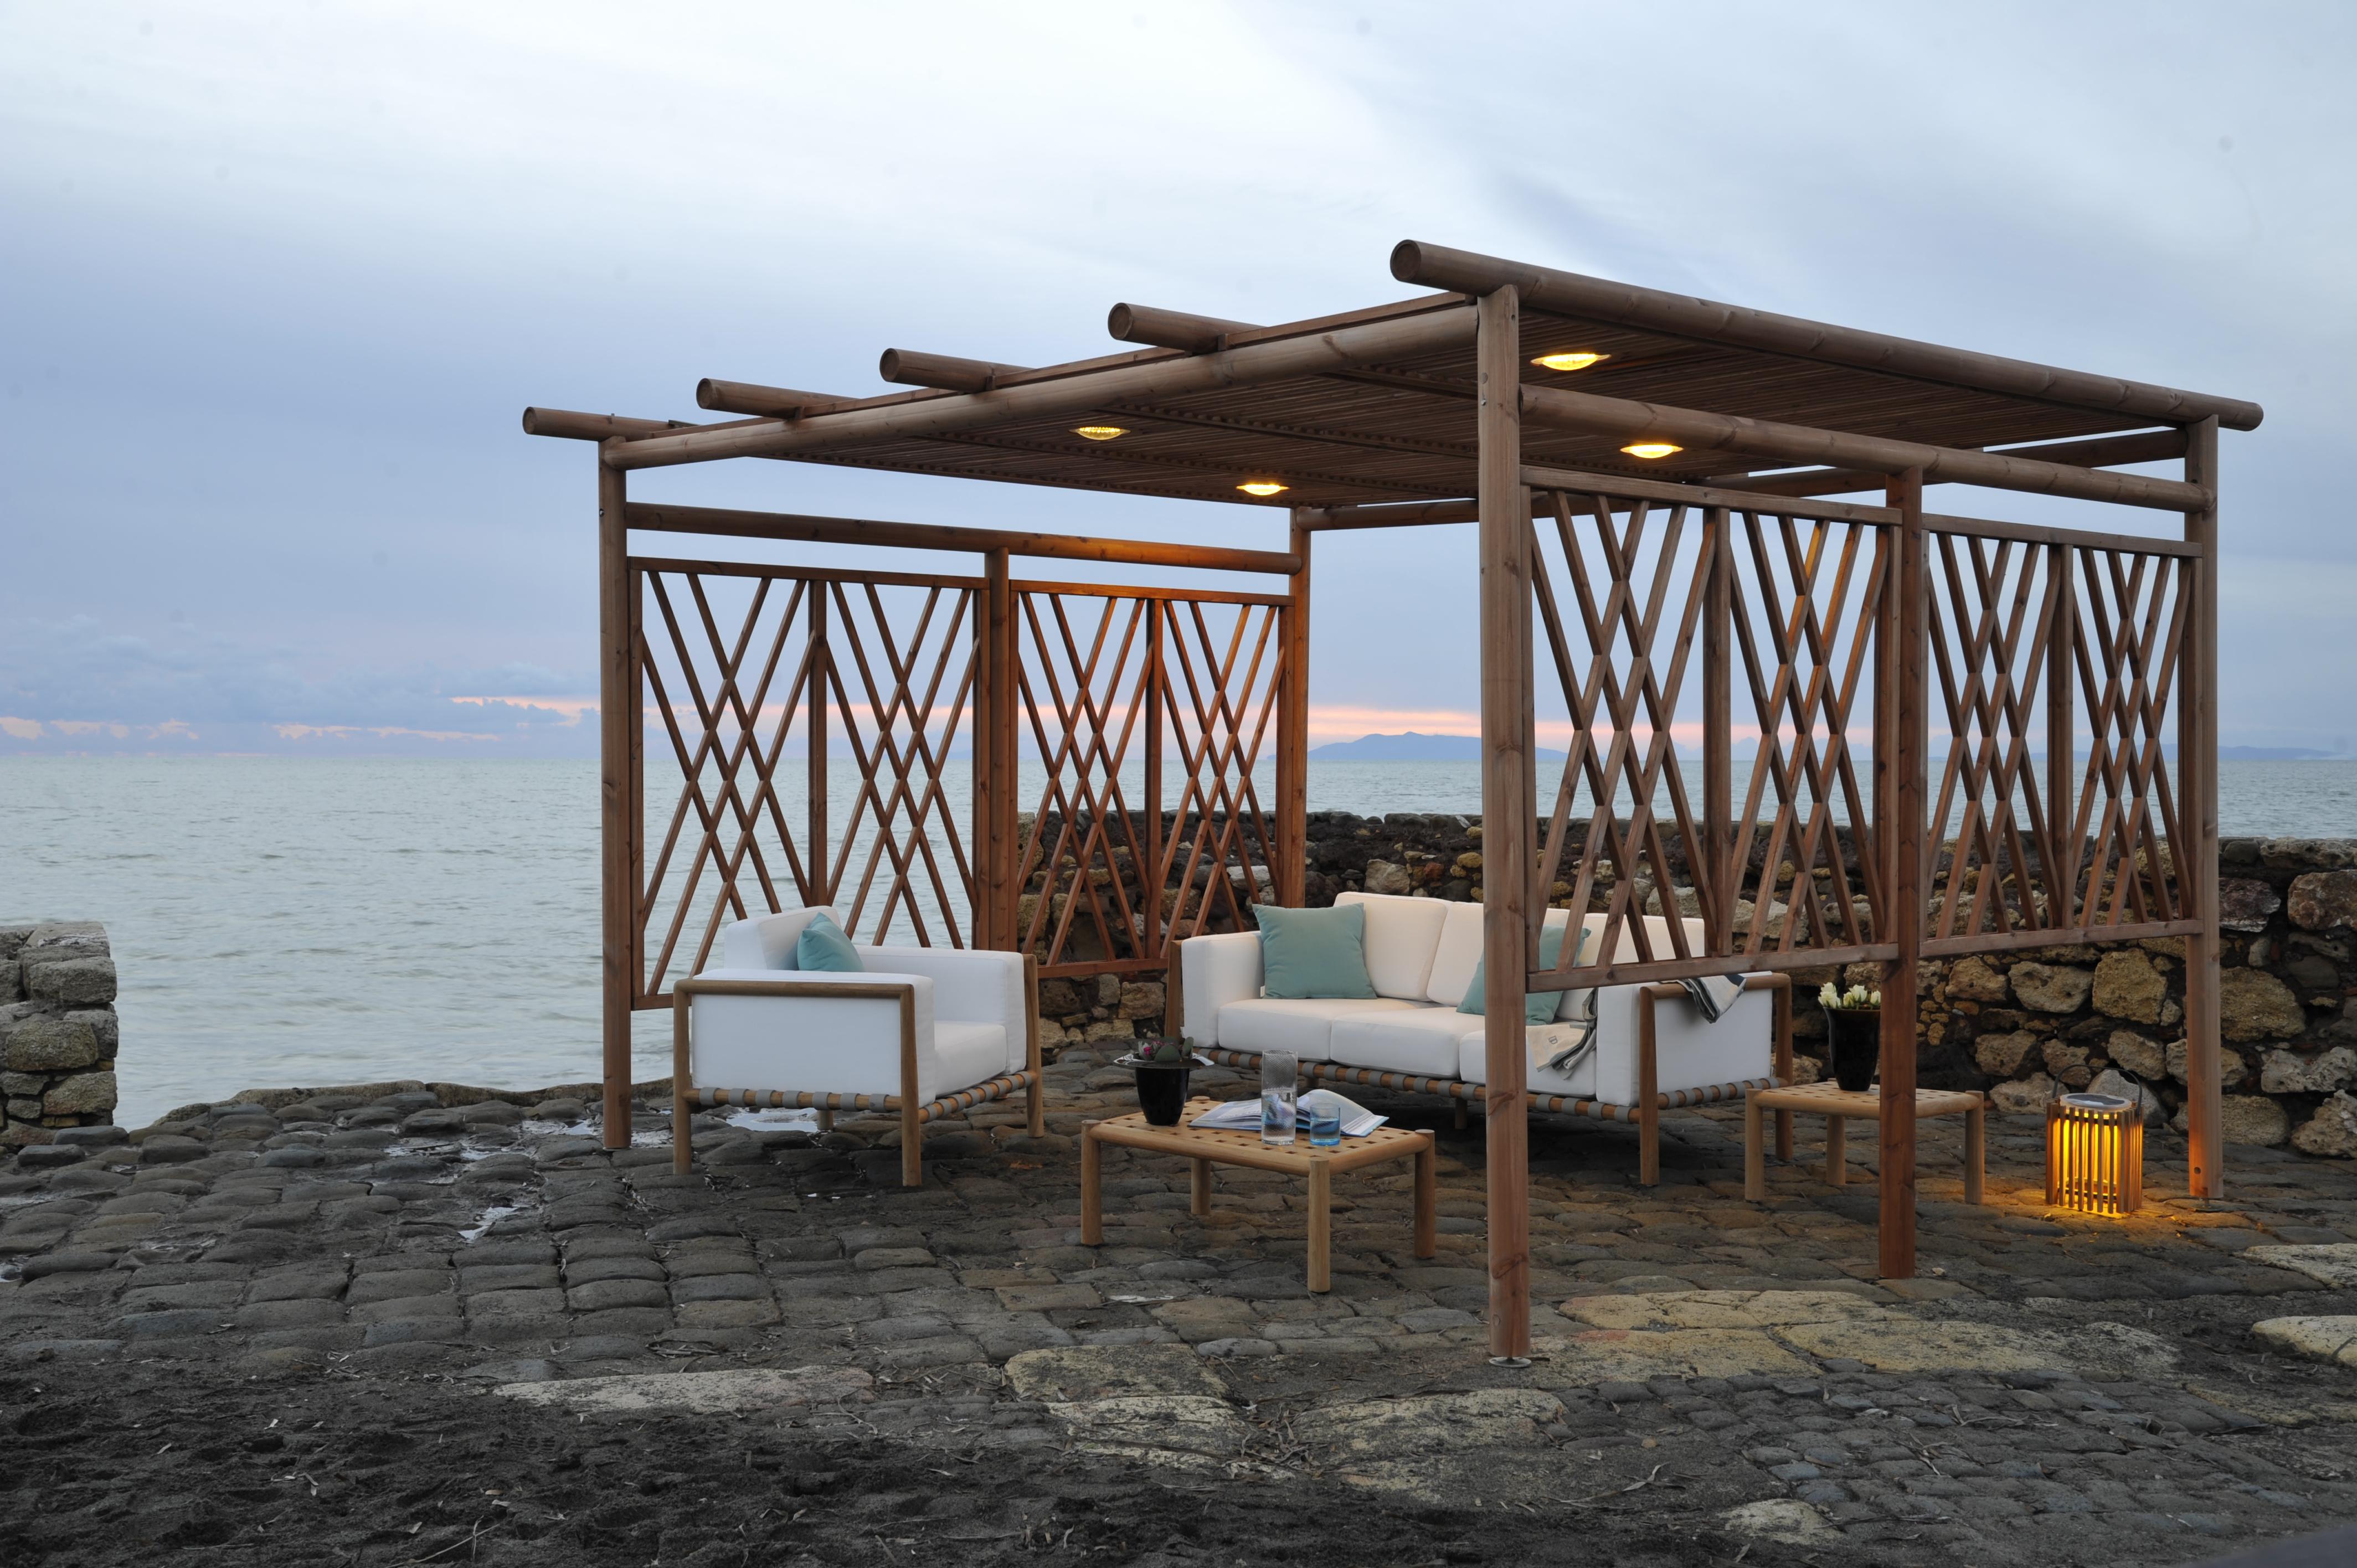 Nagi is a complete system of outdoor structures that can be customised with the utmost free- dom, made of impregnated Nordic pine wood in bankirai or white colour to ensure solidity and durability.
Inspired by Japanese aesthetics, the modern cir-